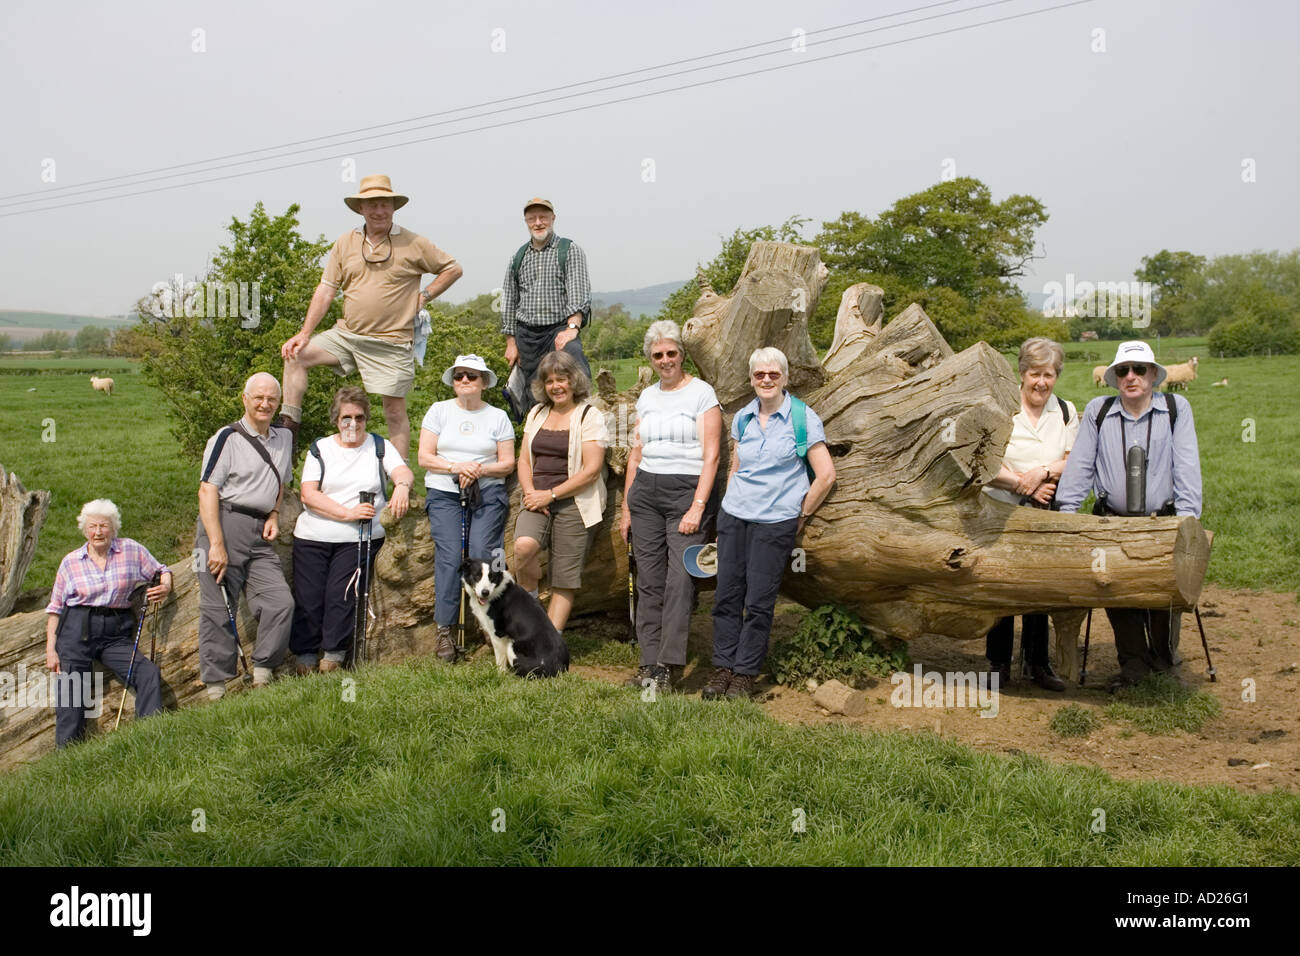 Group of senior citizens pause for photo on country walk Cotswolds UK Stock Photo